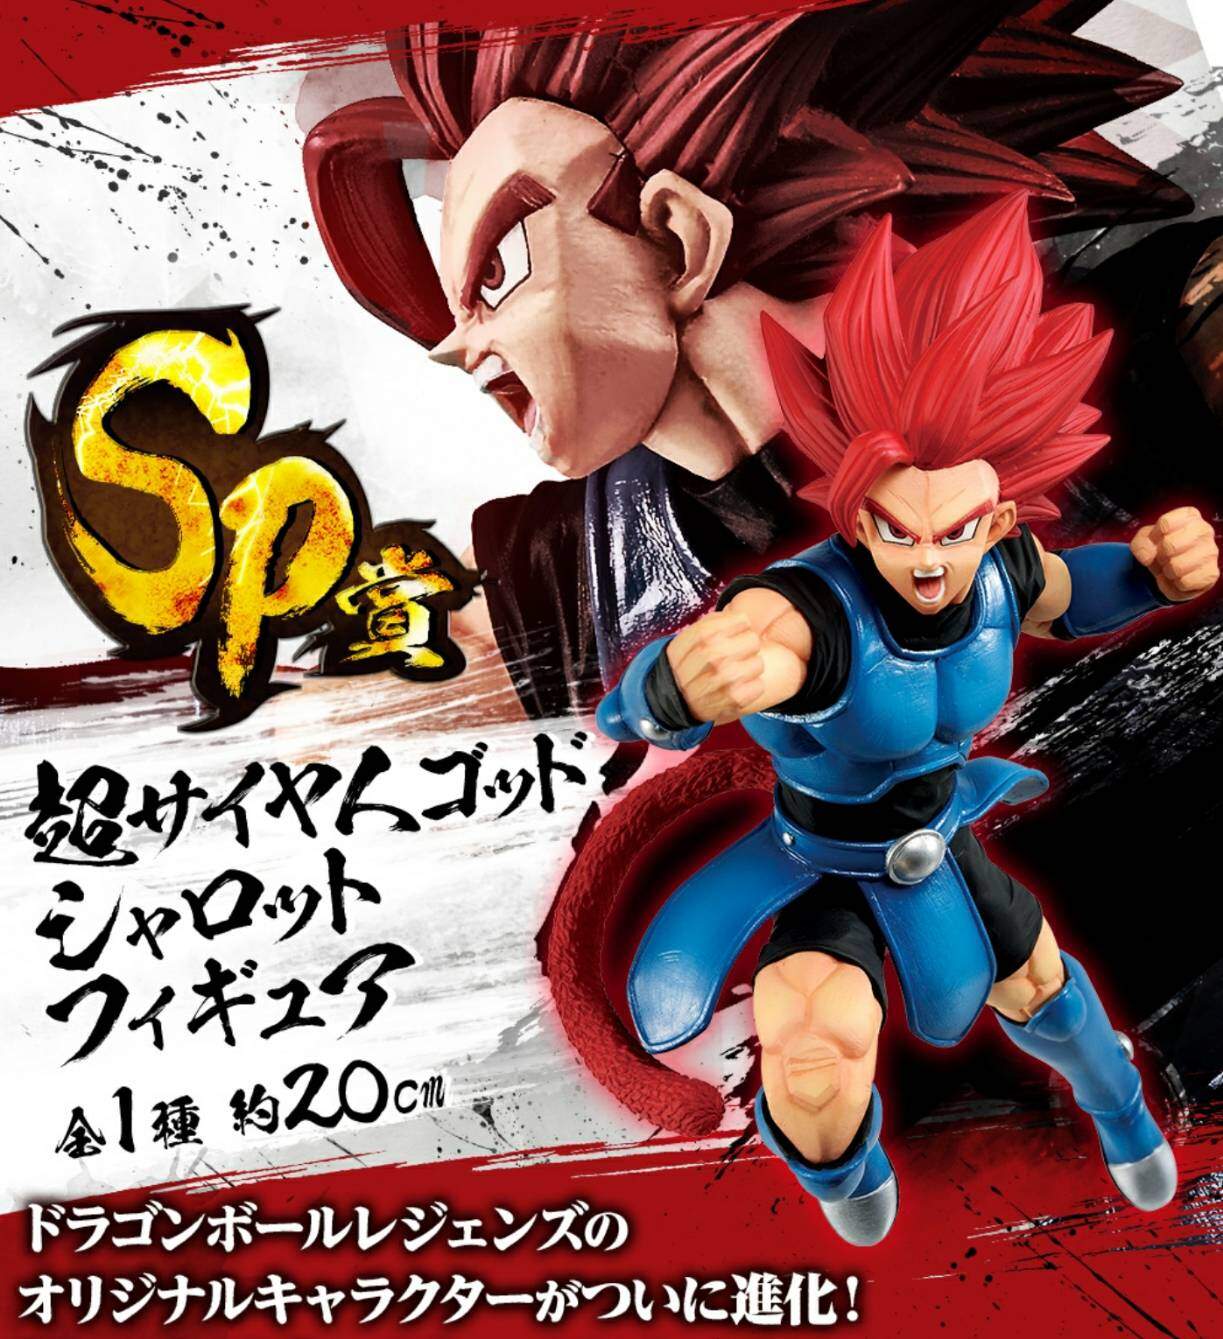 (FIGURINE) DRAGON BALL SUPER ICHIBAN KUJI RISING FIGHTERS with DRAGON BALL LEGENDS SP SHALLOT